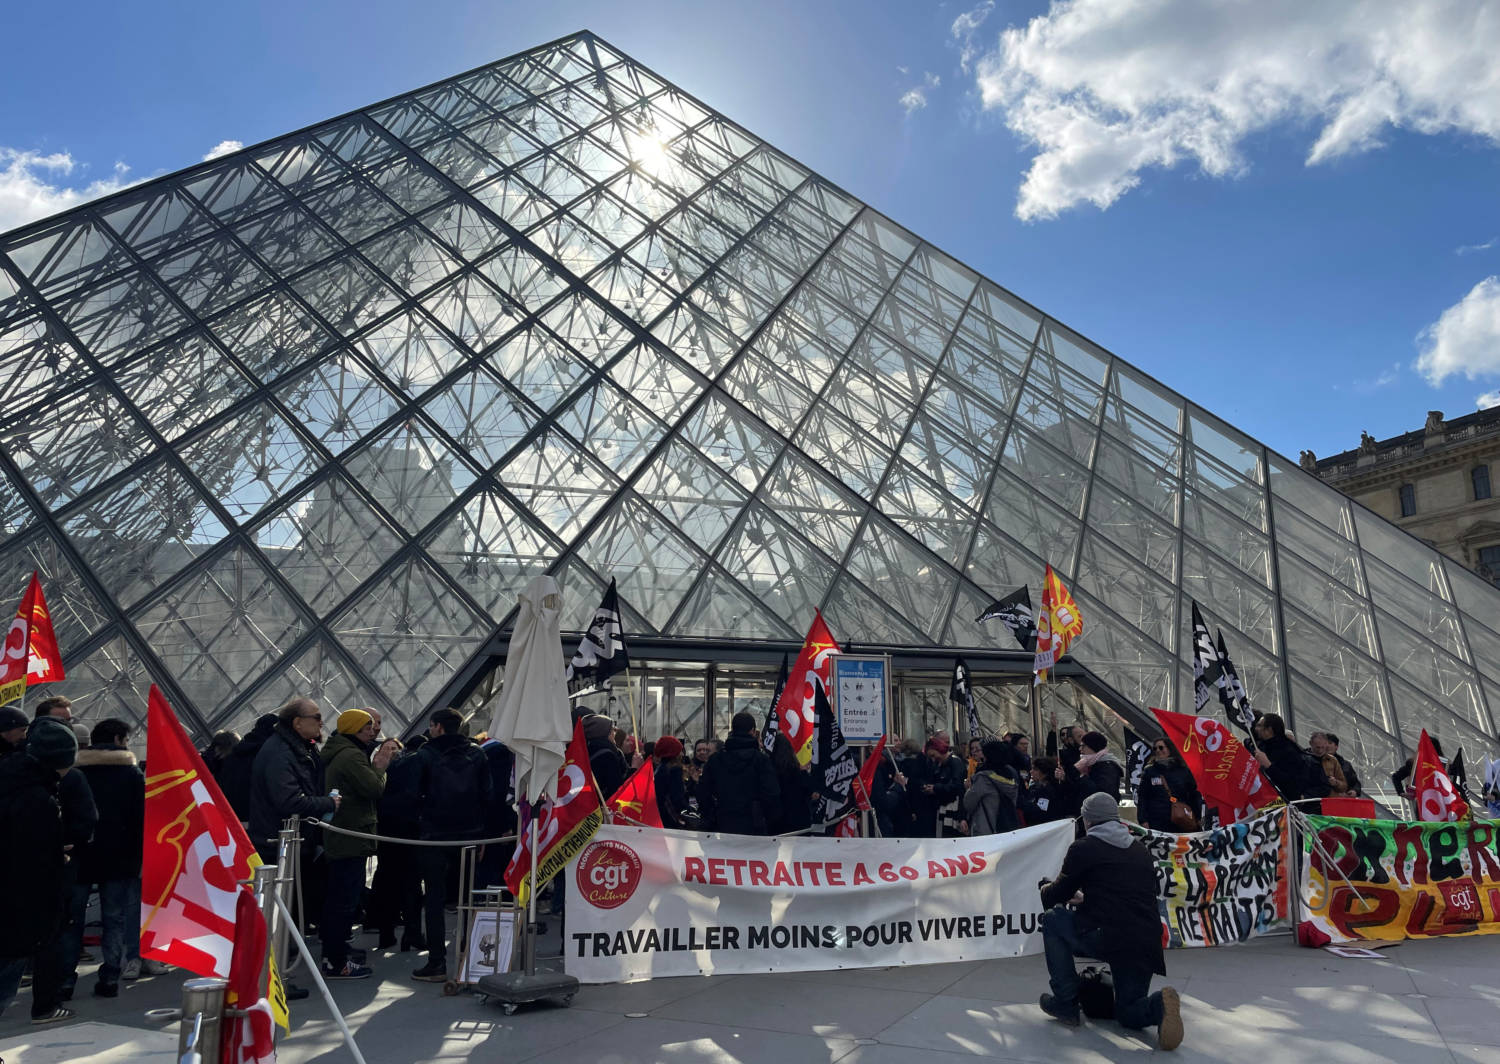 Protest Against Pension Reform In Front Of The Louvre Museum In Paris